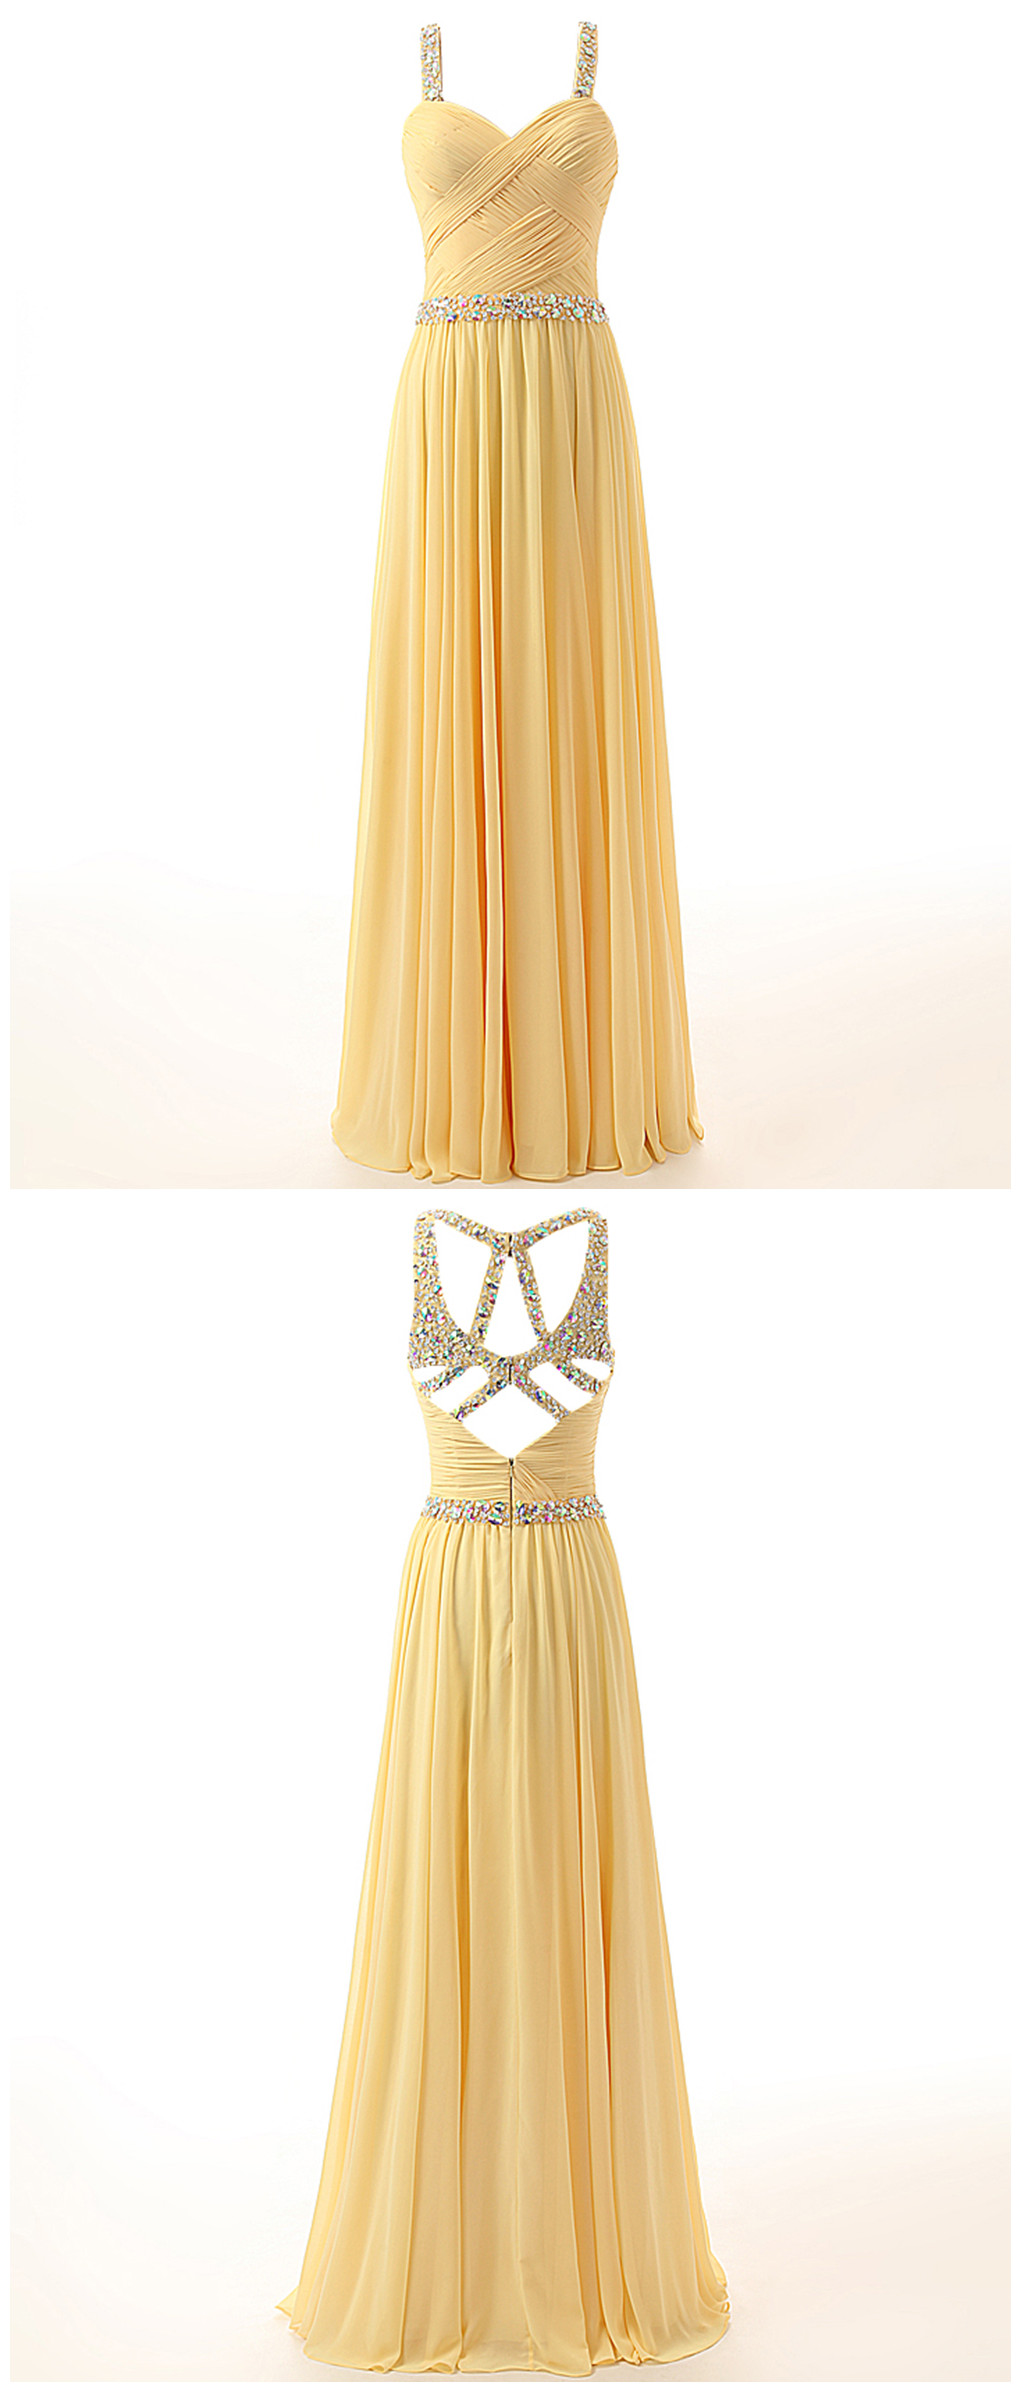 Long Chiffon A-line Prom Dress Featuring Beaded Embellished Spaghetti Straps Ruched Sweetheart Bodice And Cutout Back